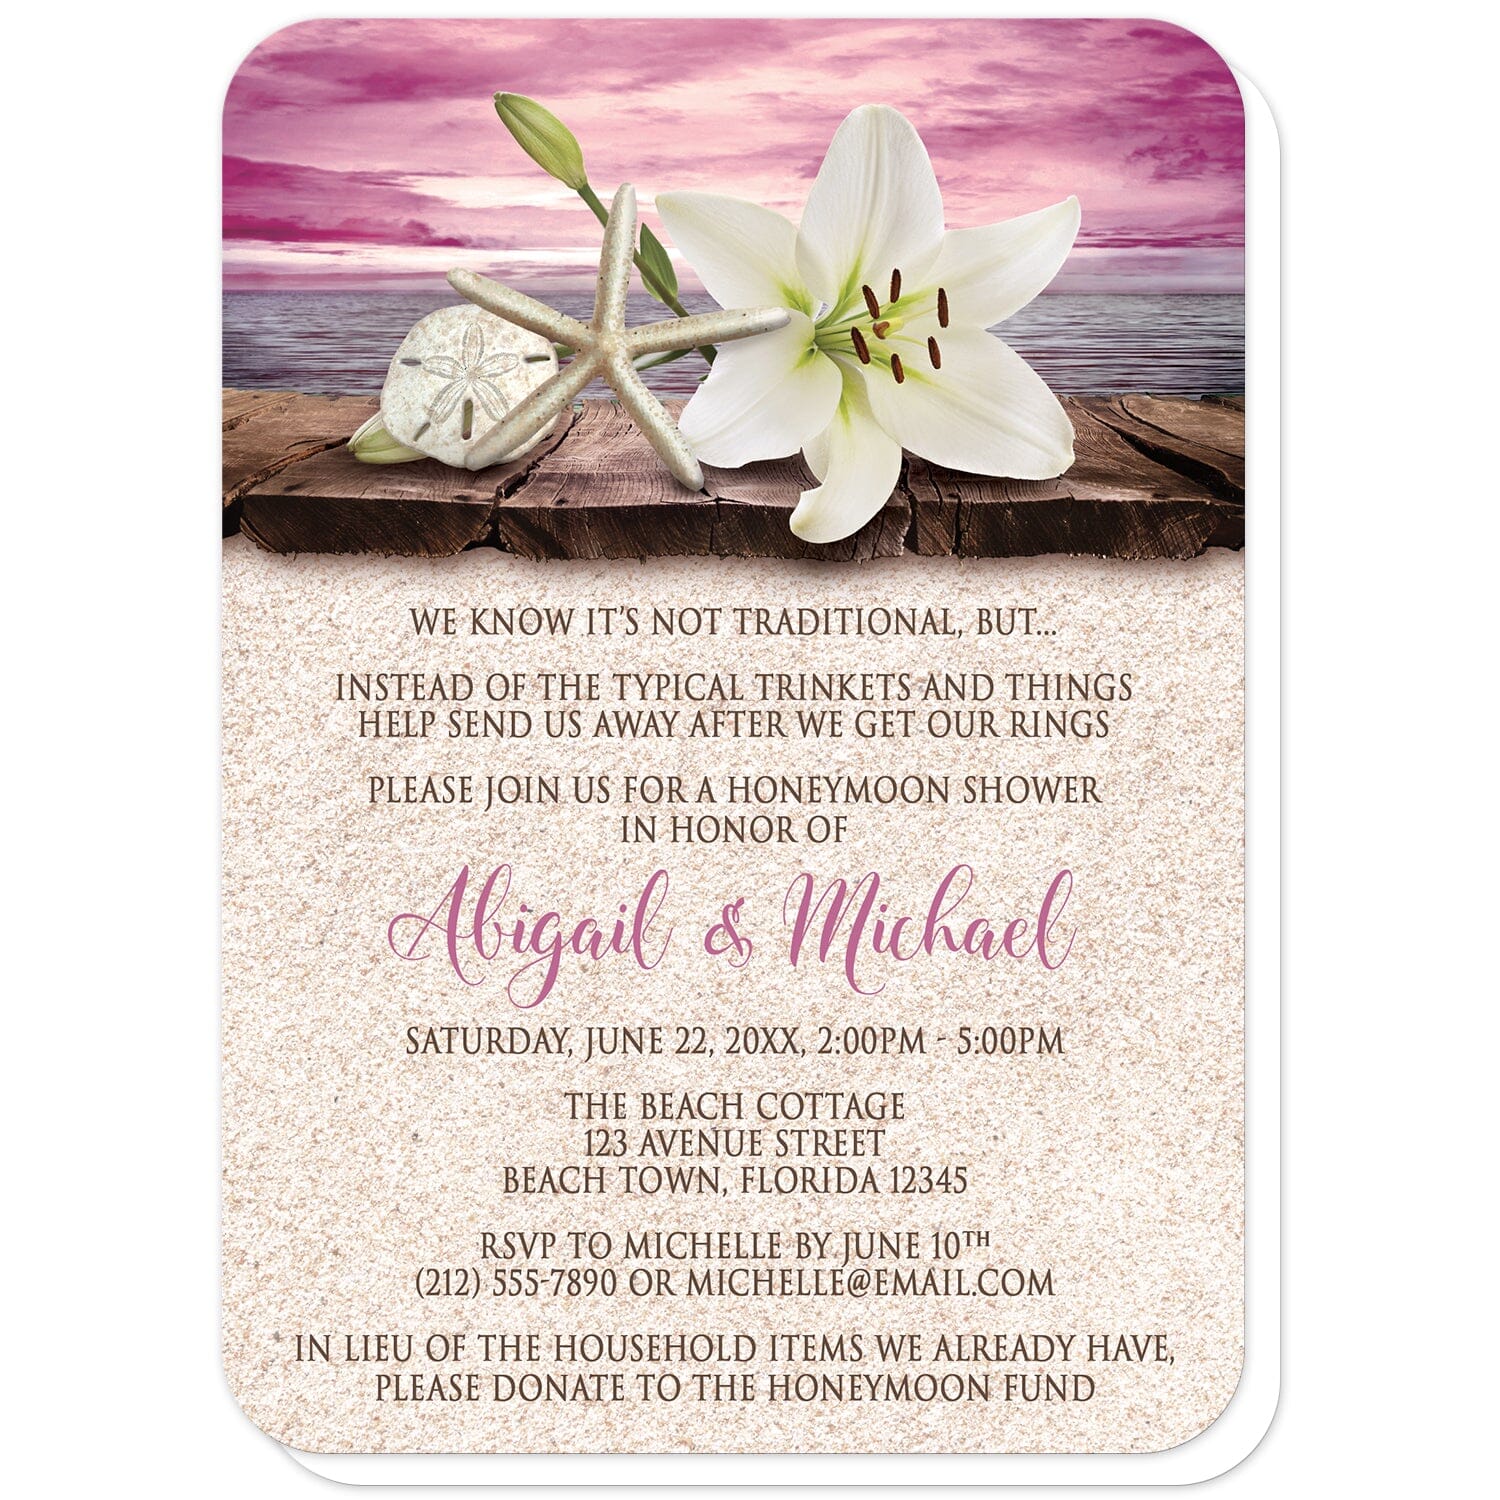 Lily Seashells and Sand Magenta Beach Honeymoon Shower Invitations (with rounded corners) at Artistically Invited. Tropical lily seashells and sand magenta beach honeymoon shower invitations with an elegant white lily, a starfish, and a sand dollar on a rustic wood dock overlooking the open water under a magenta sunset sky. Your personalized honeymoon shower celebration details are custom printed in dark brown and magenta over a beige sand background design. 